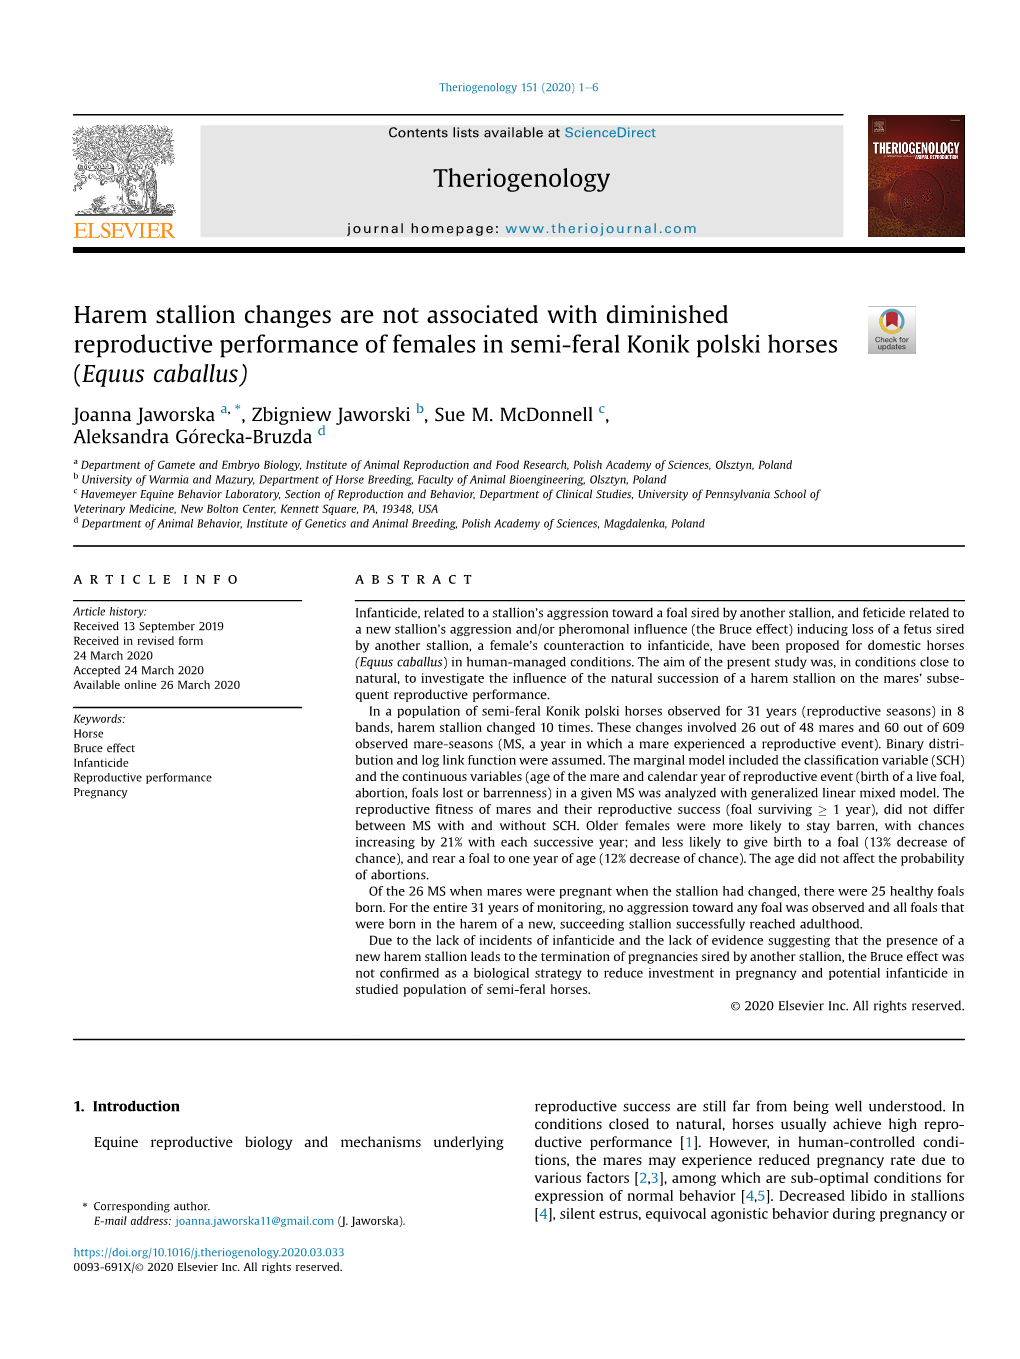 Harem Stallion Changes Are Not Associated with Diminished Reproductive Performance of Females in Semi-Feral Konik Polski Horses (Equus Caballus)